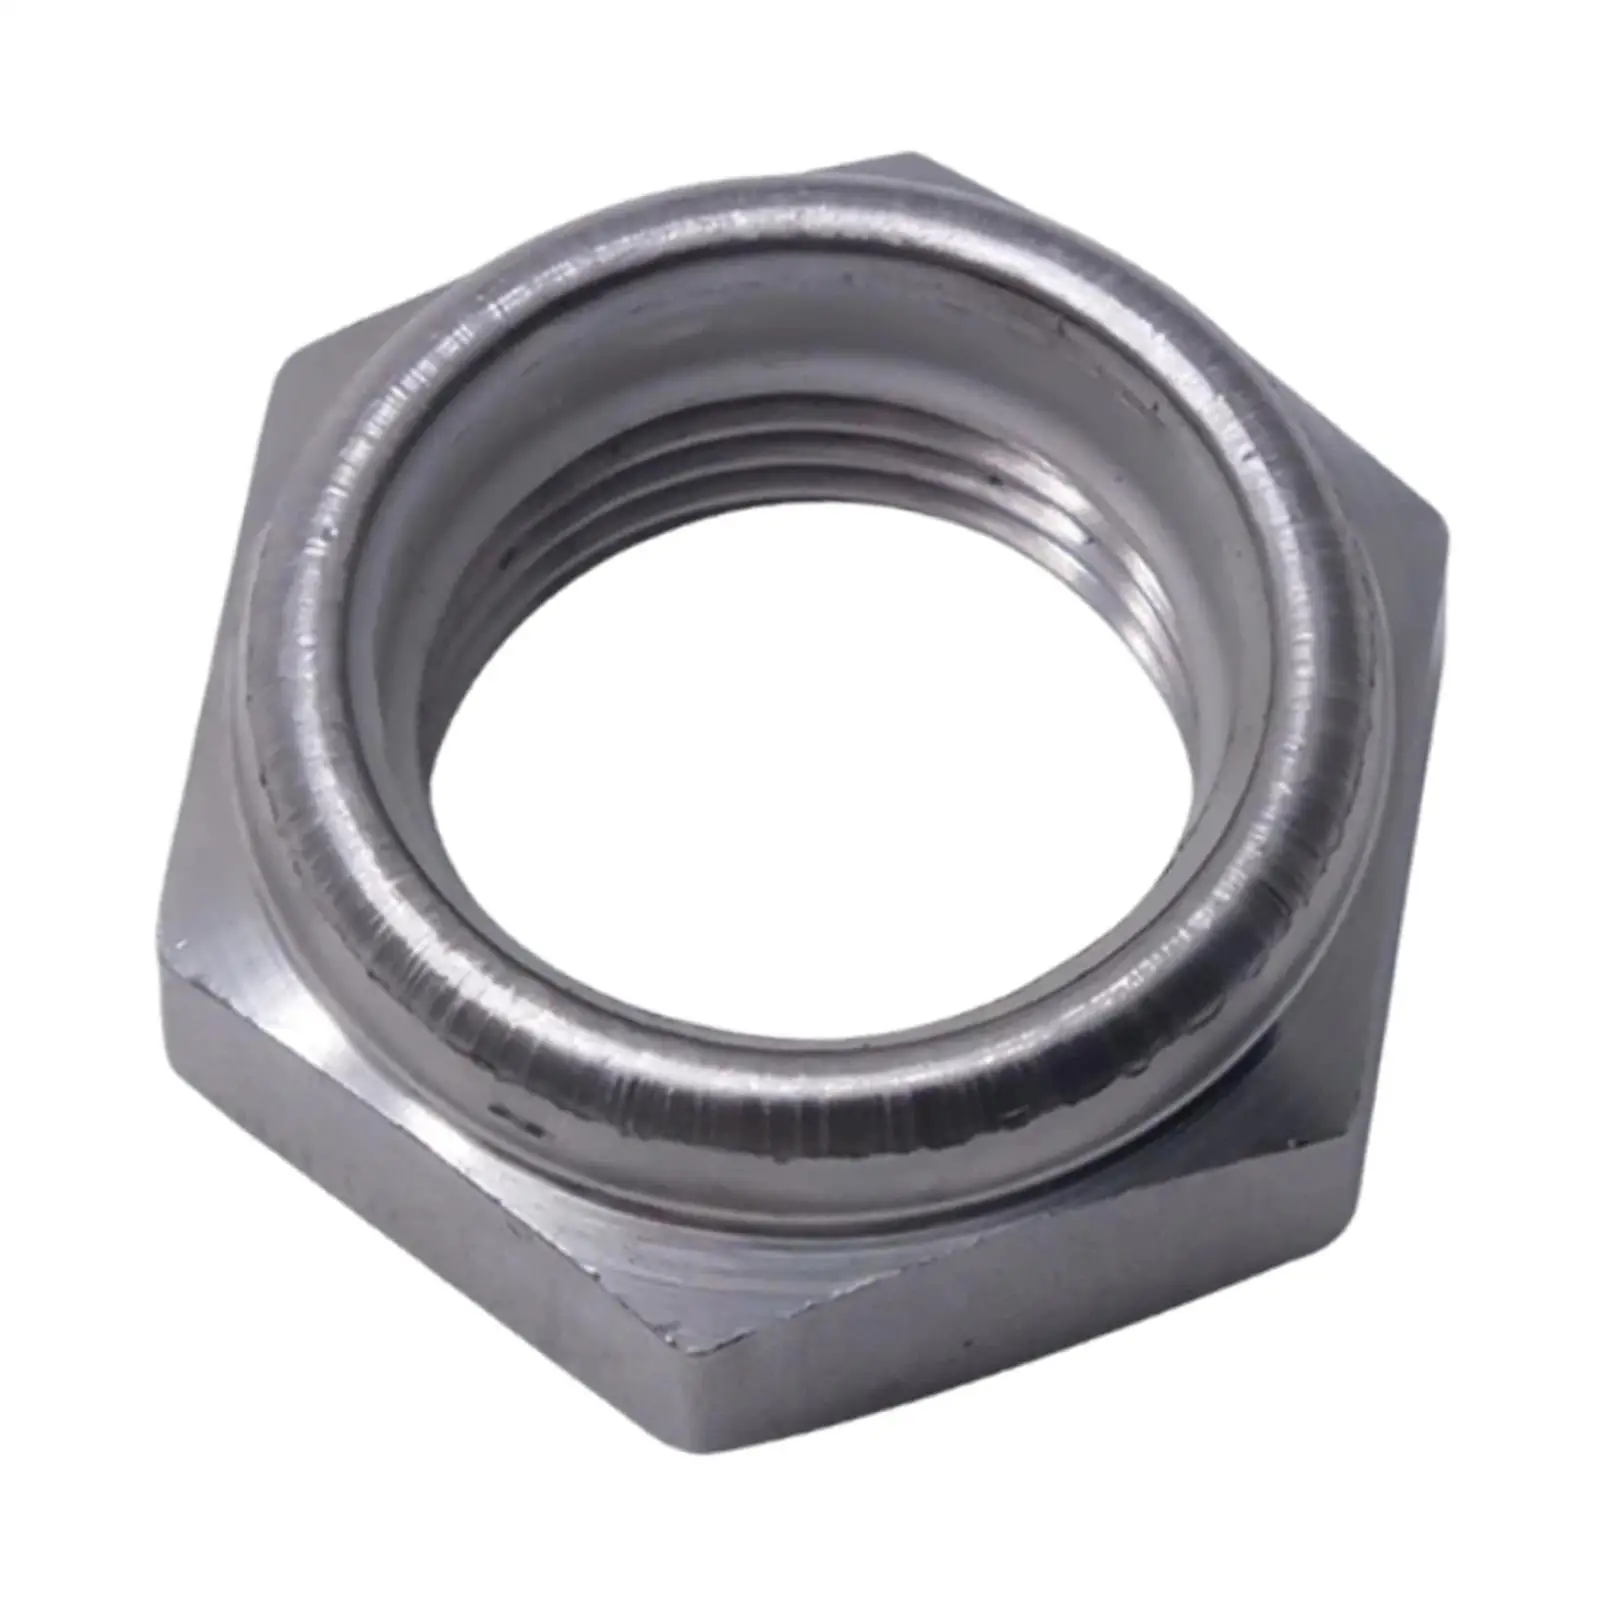 Replacement Self Locking Nut Sturdy 90185-22043-00 Stainless